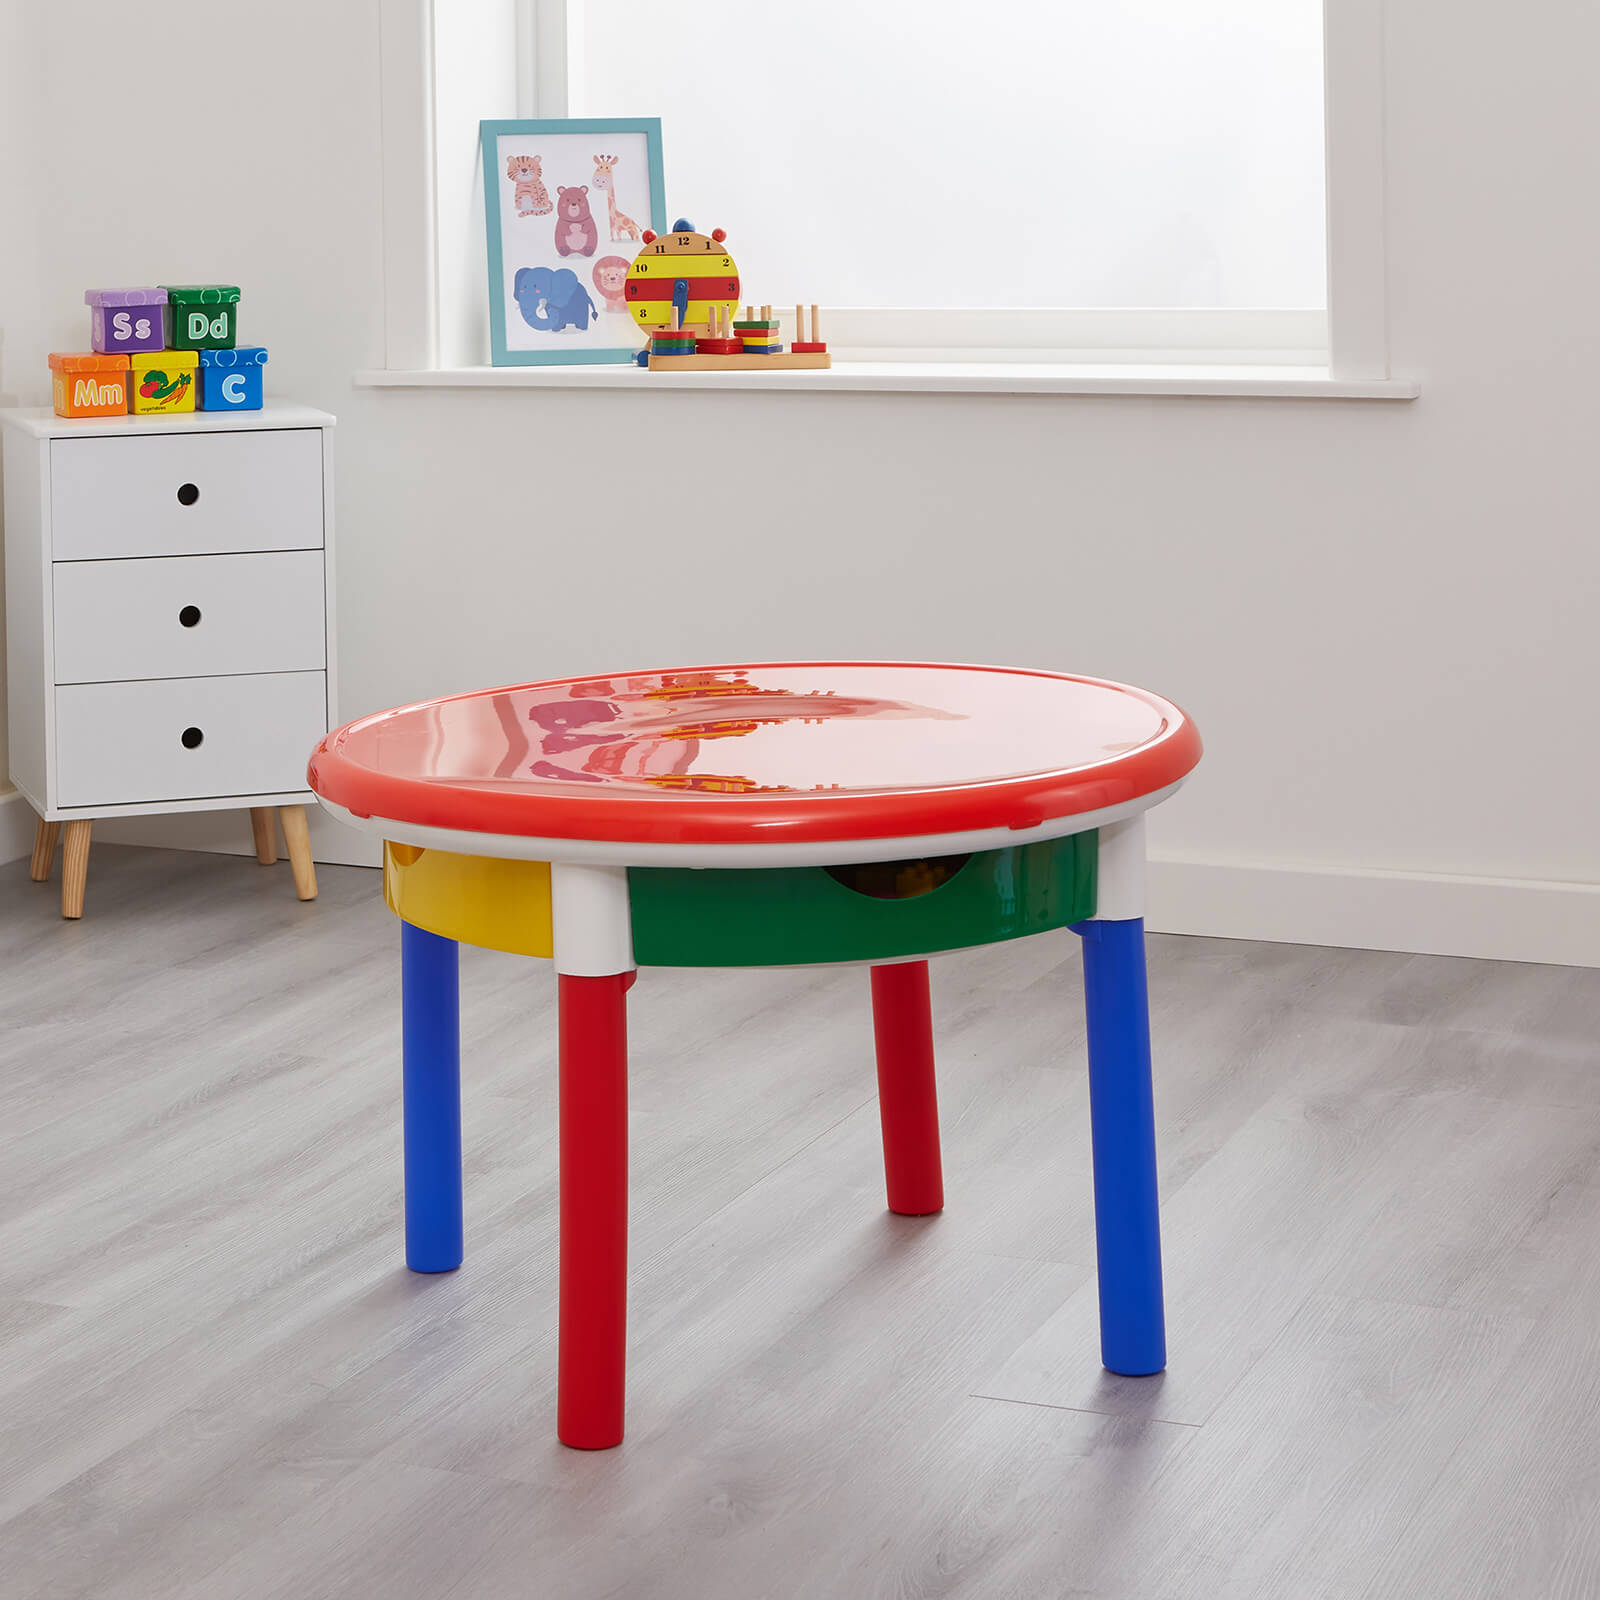 Round Activity Table With Drawers